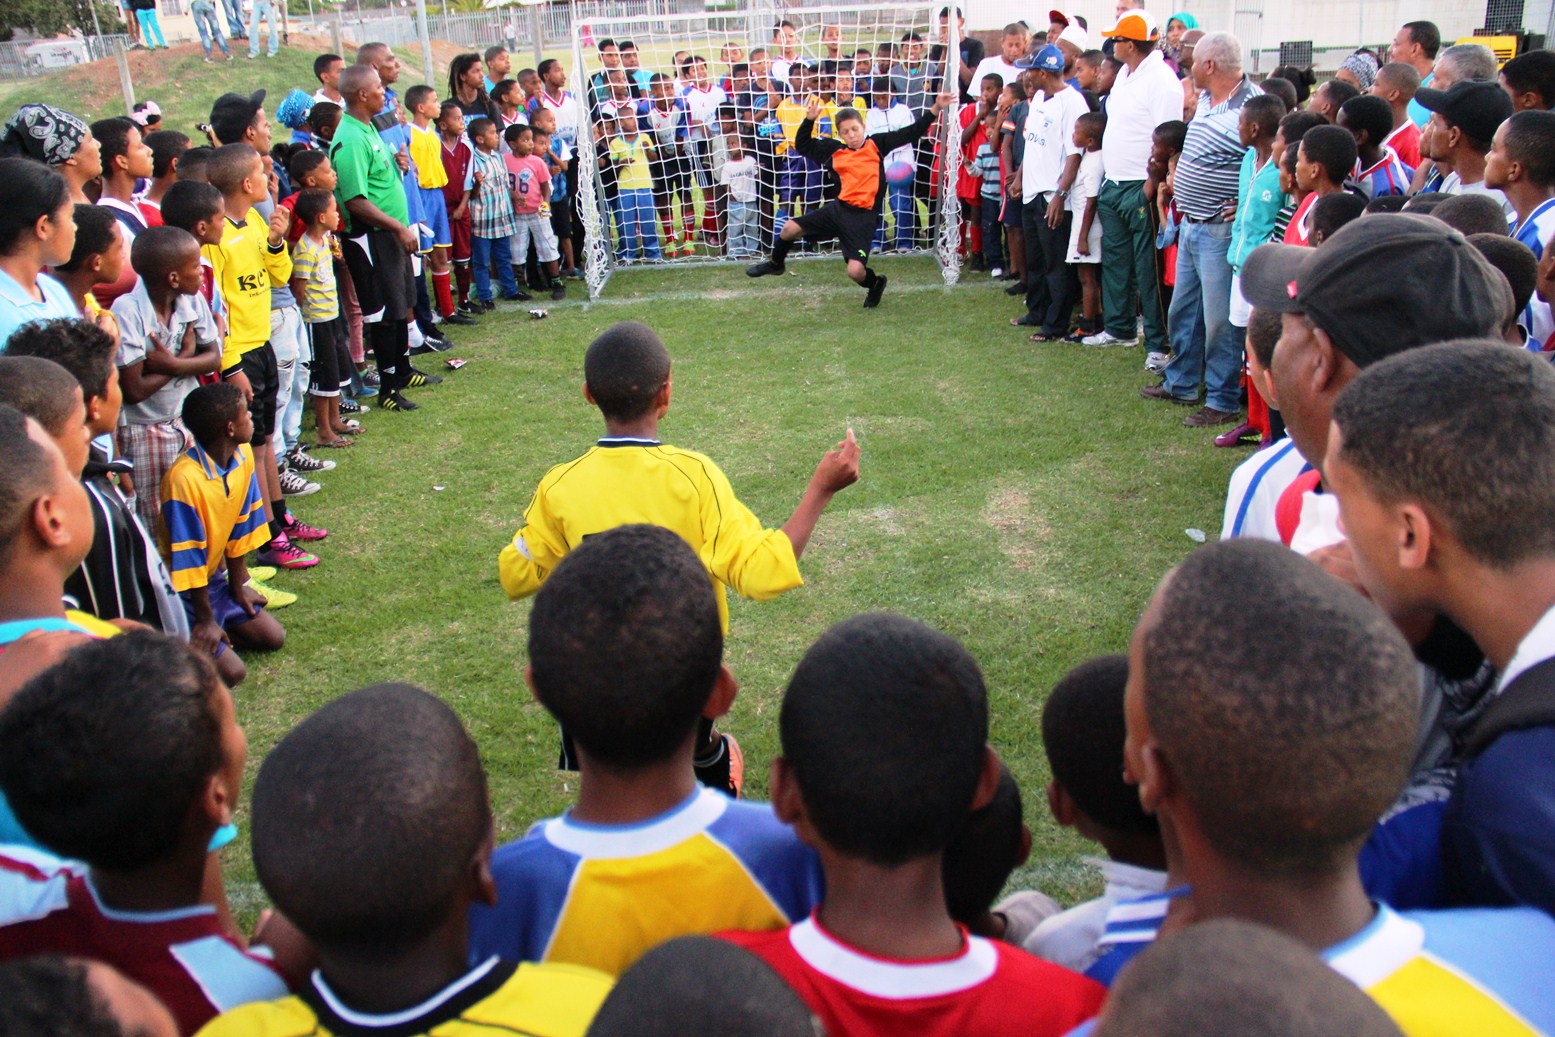 An exciting penalty shootout between South End (Mozambique) and Phantom Orion (Ghana).